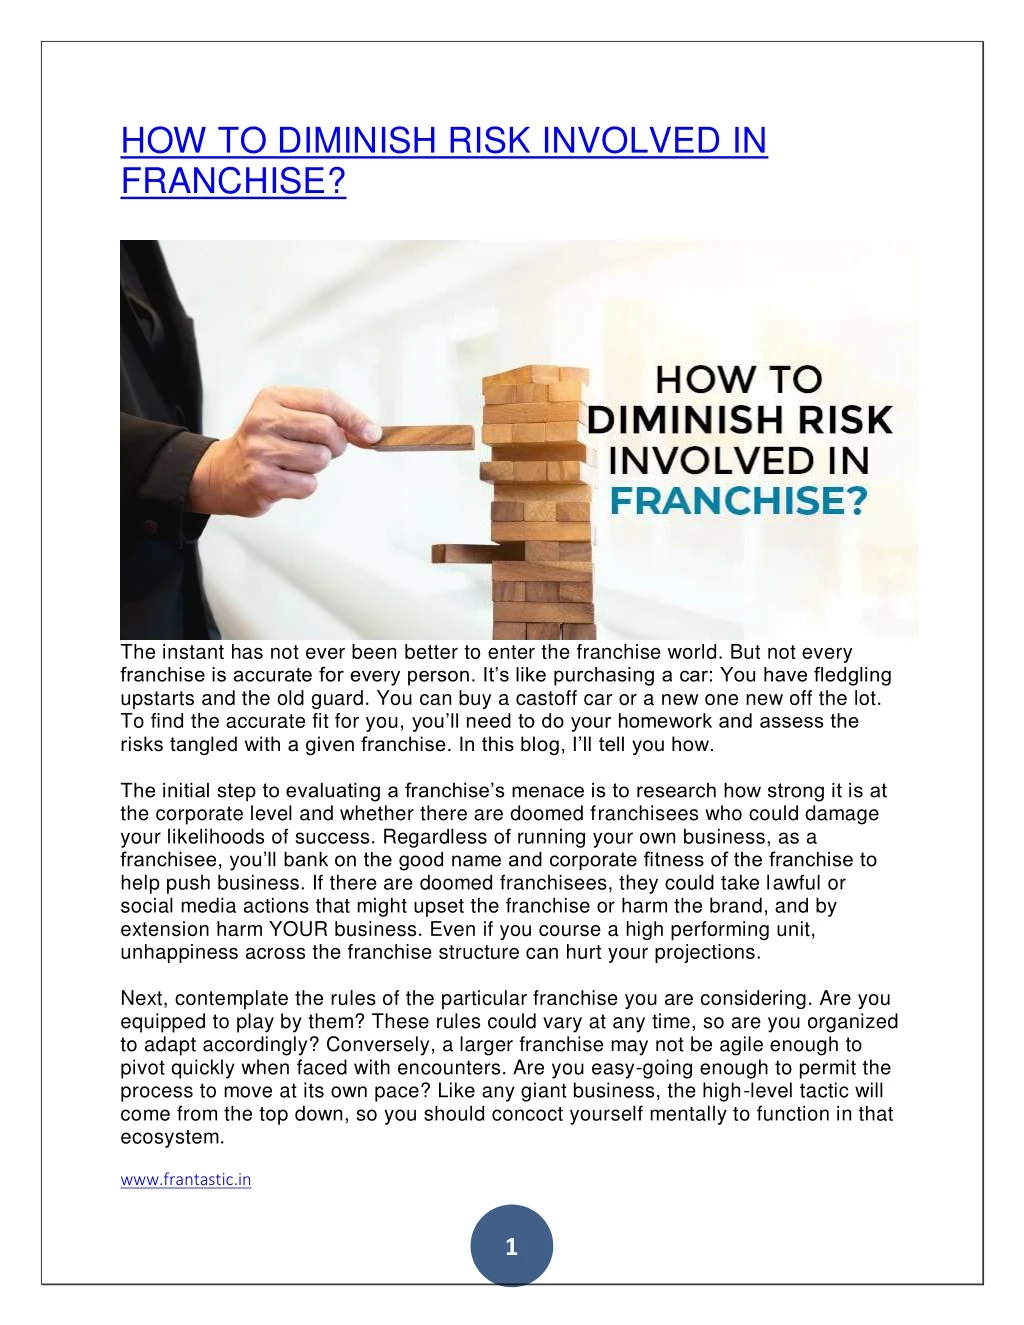 how to diminish risk involved in franchise